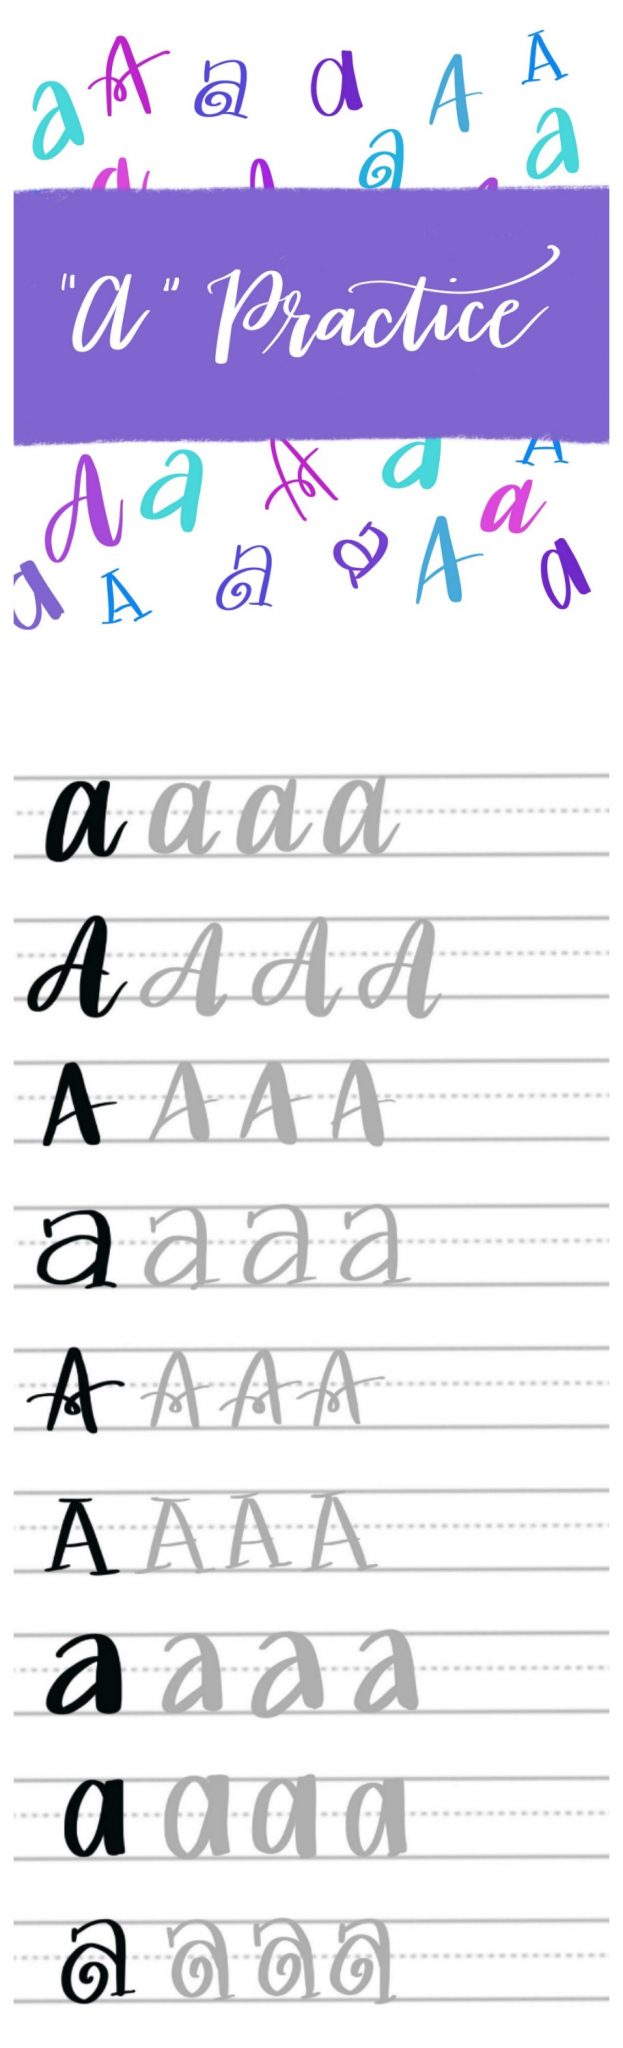 Hand Lettering Practice Sheet: The Letter A